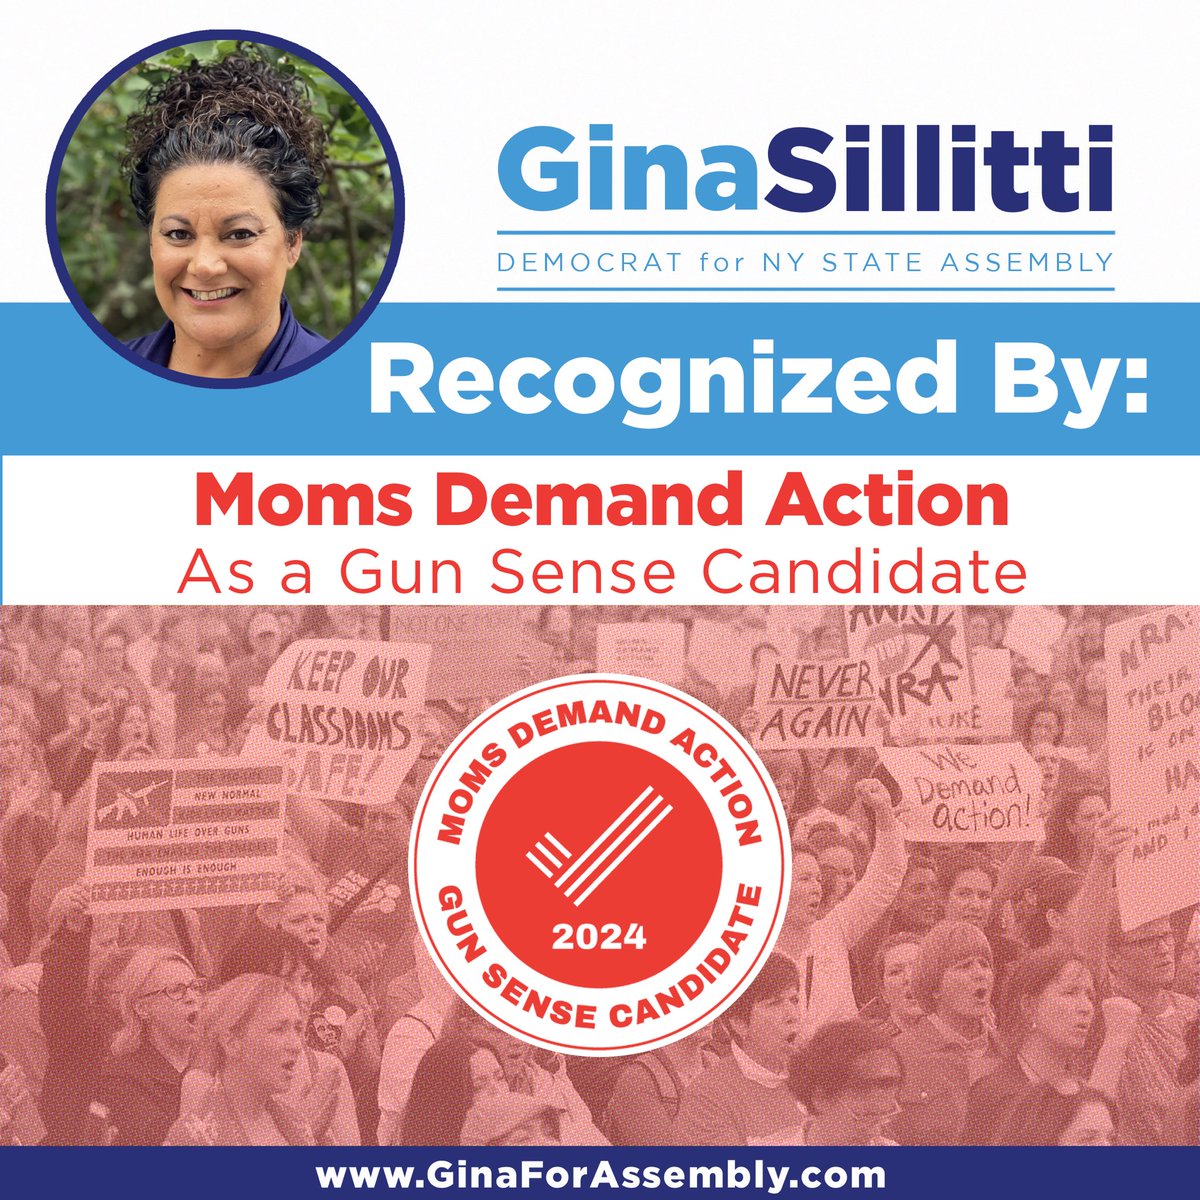 I am so proud that our campaign is recognized by @MomsDemand as a Gun Sense Candidate. Firearms deaths have been climbing nationwide over the past decade and are now the number one cause of death for children in the United States. It is well past time to say Enough is Enough!